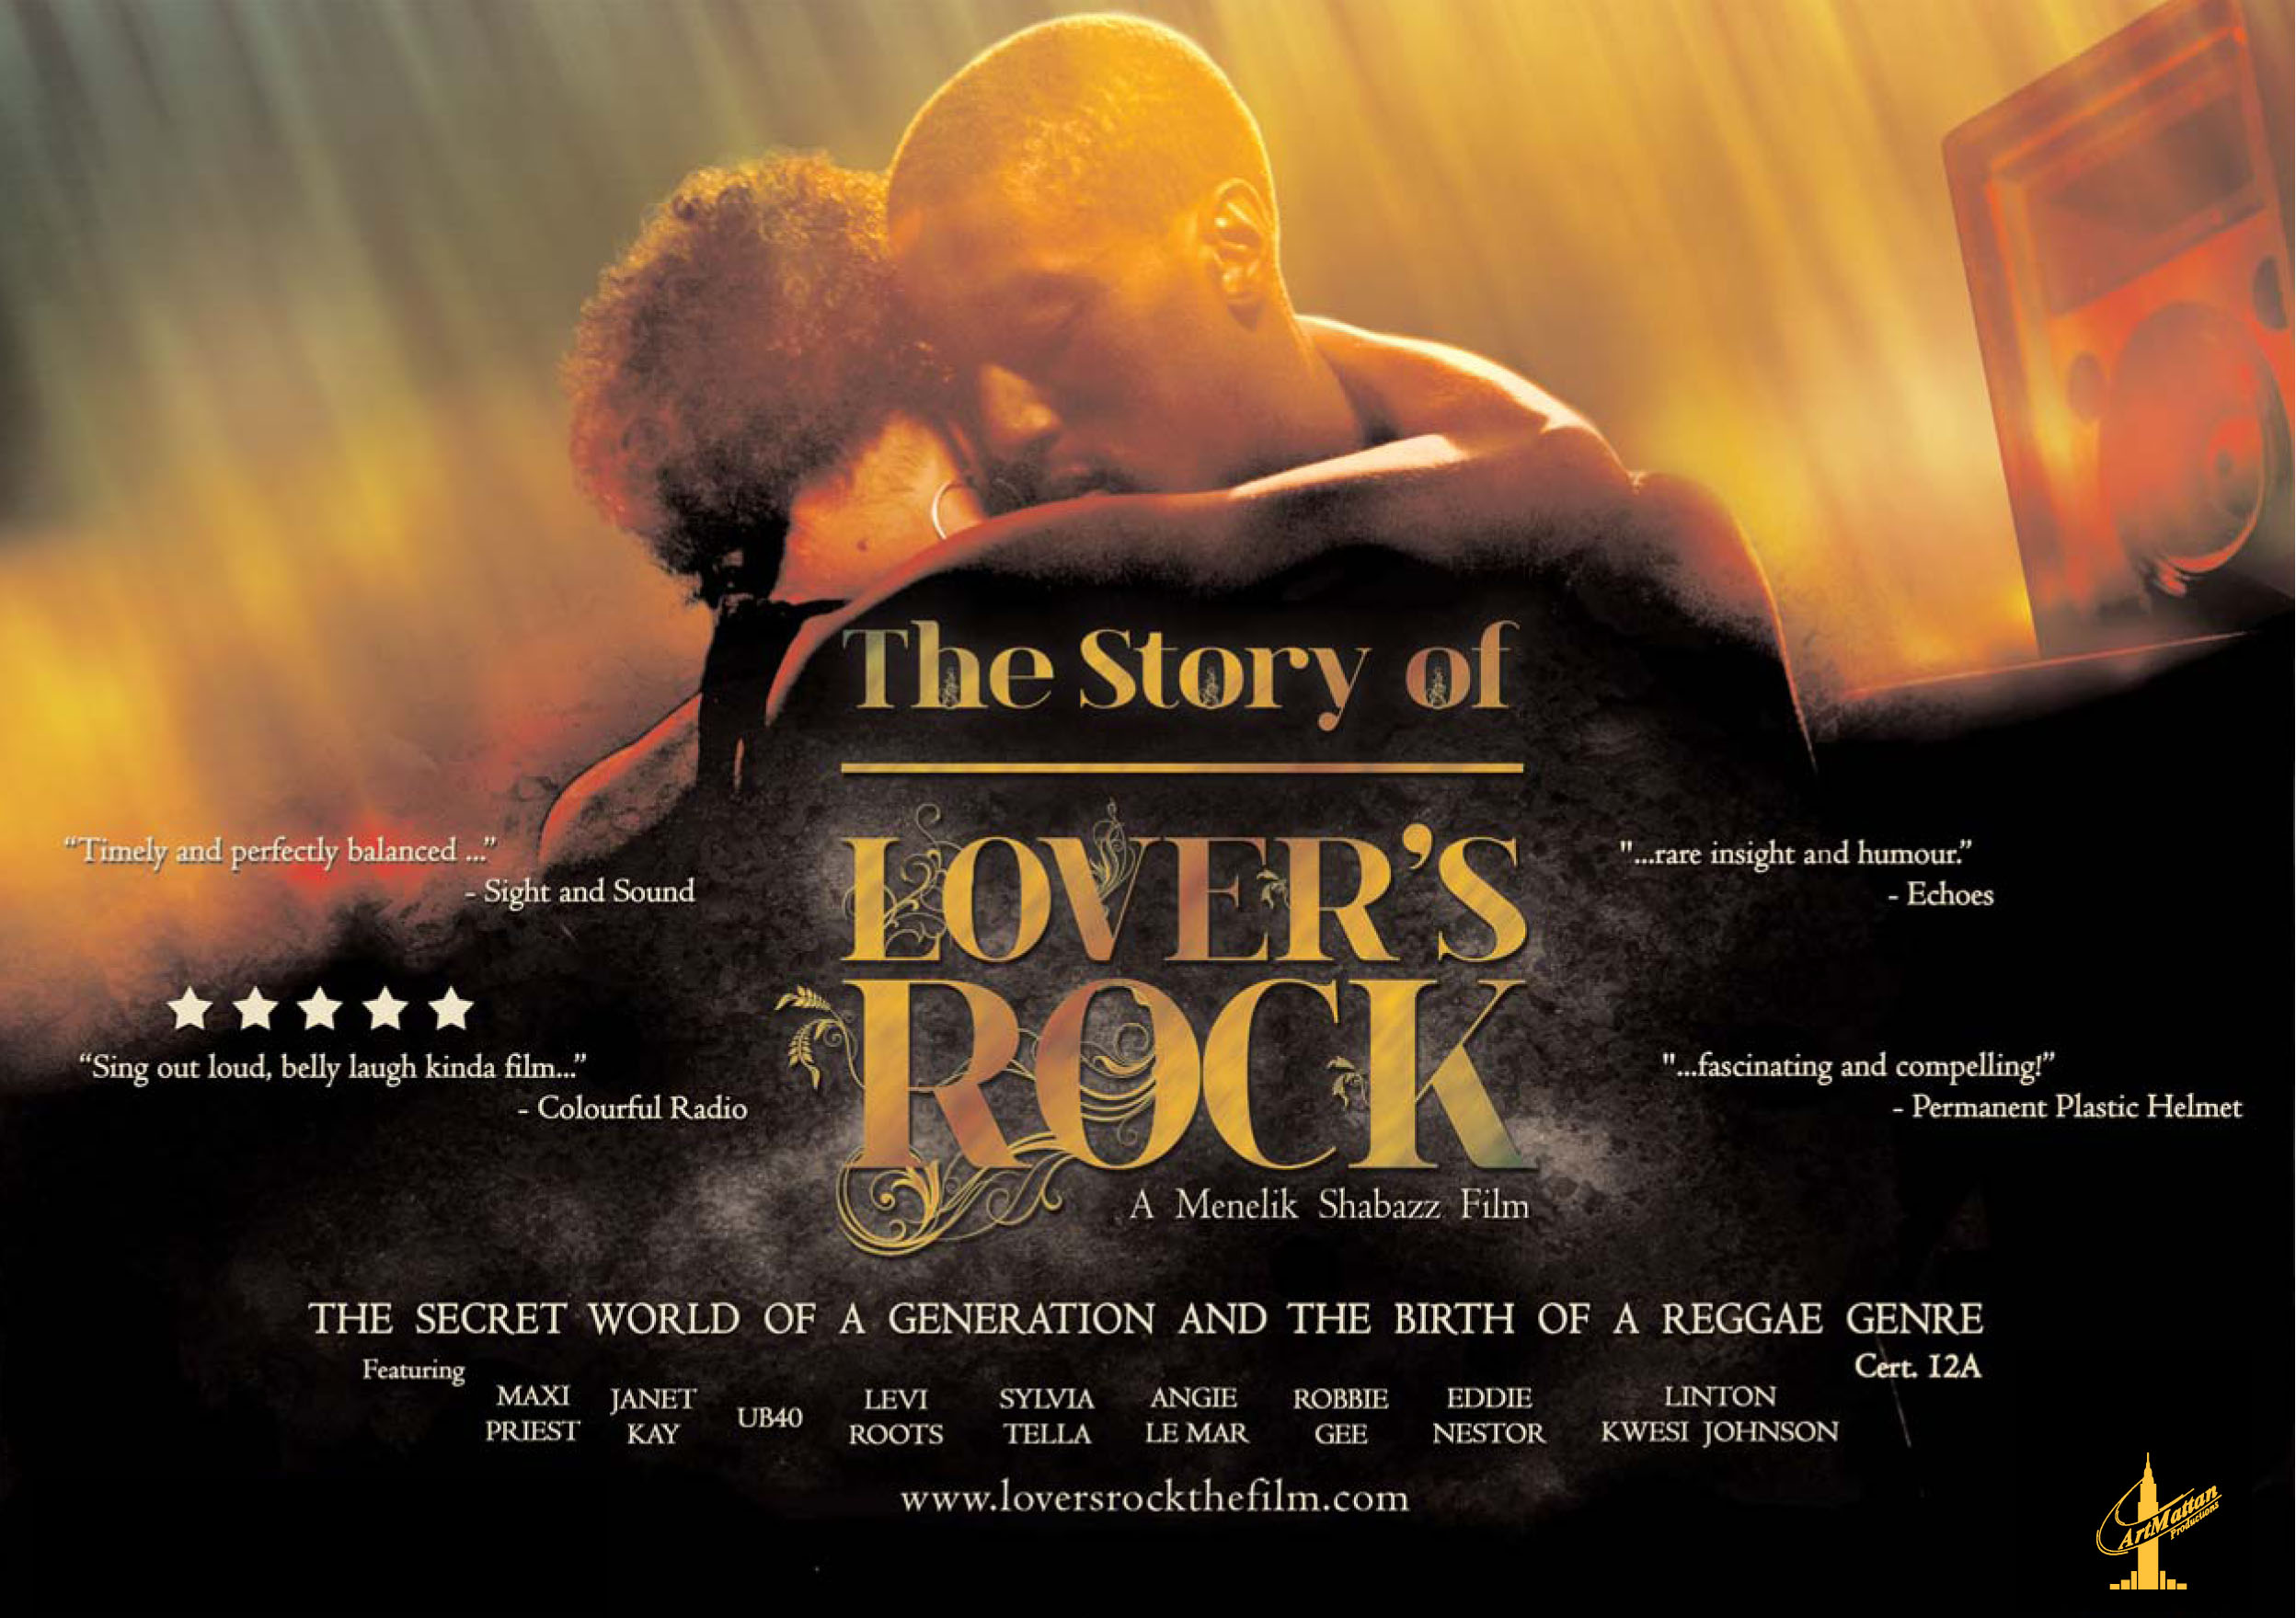 [Competition] Win A Copy of 'The Story of Lovers Rock' DVD by Menelik Shabazz